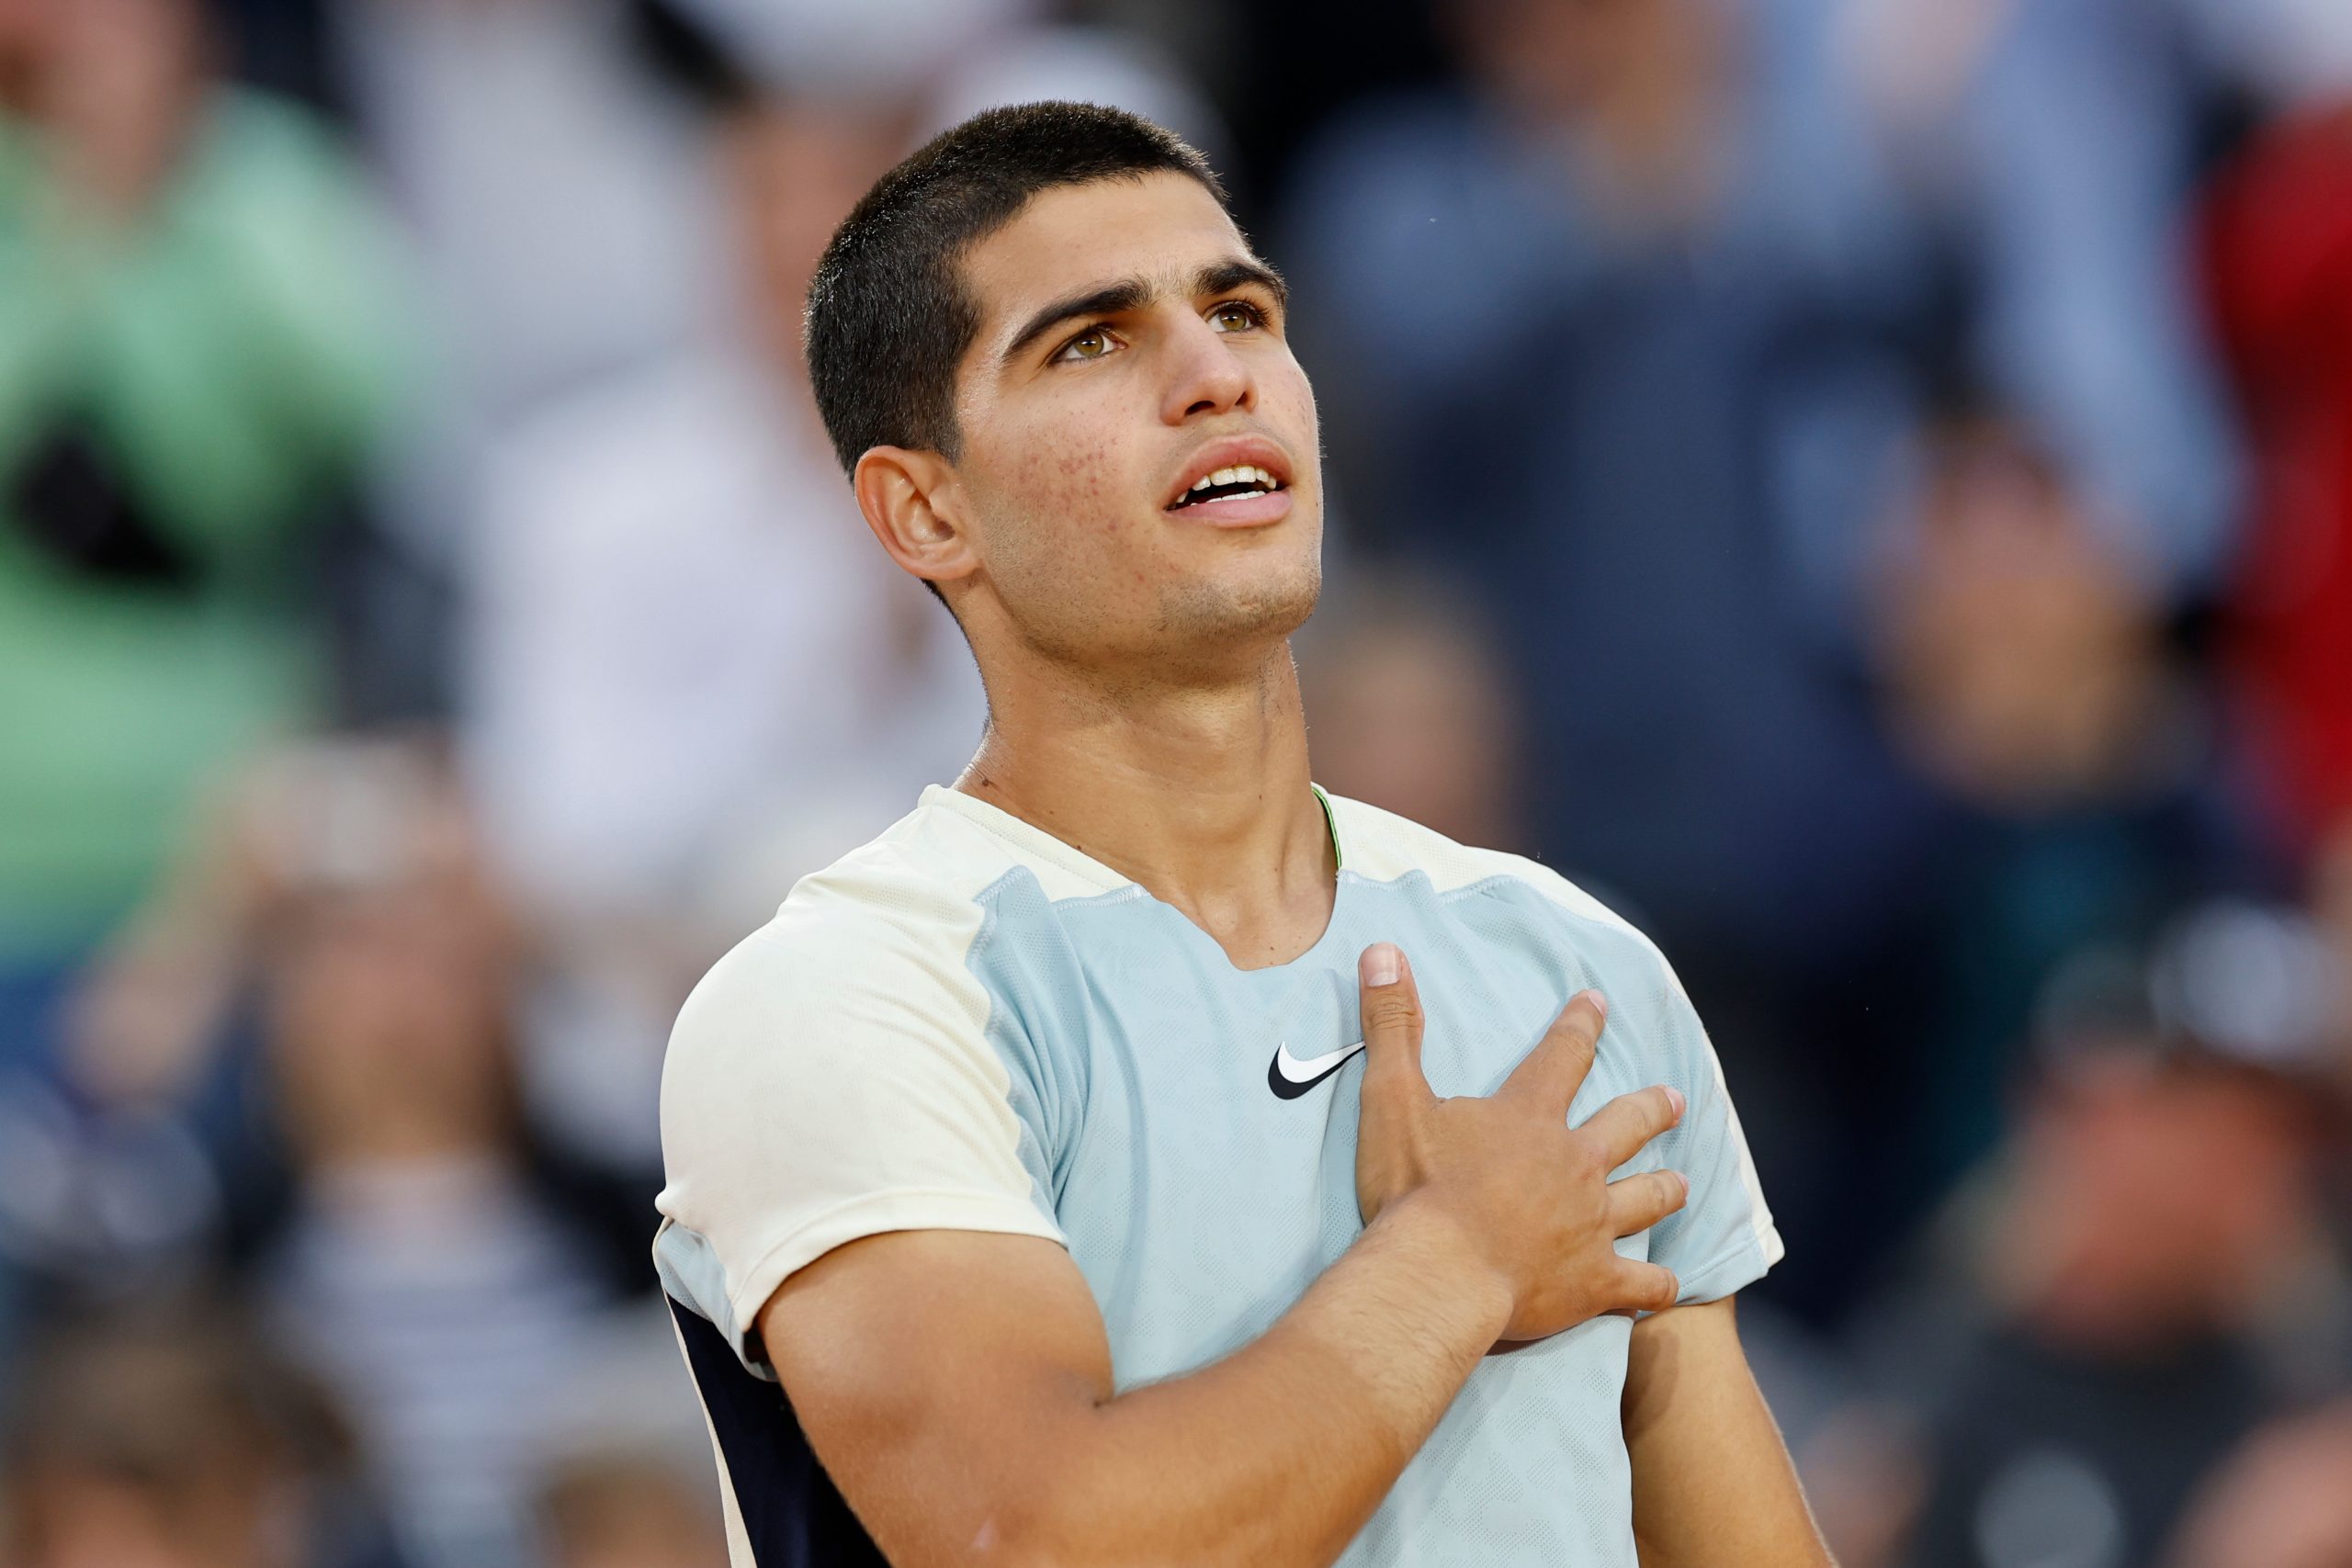 French Open 2022: Why Carlos Alcaraz could join the rank of greats